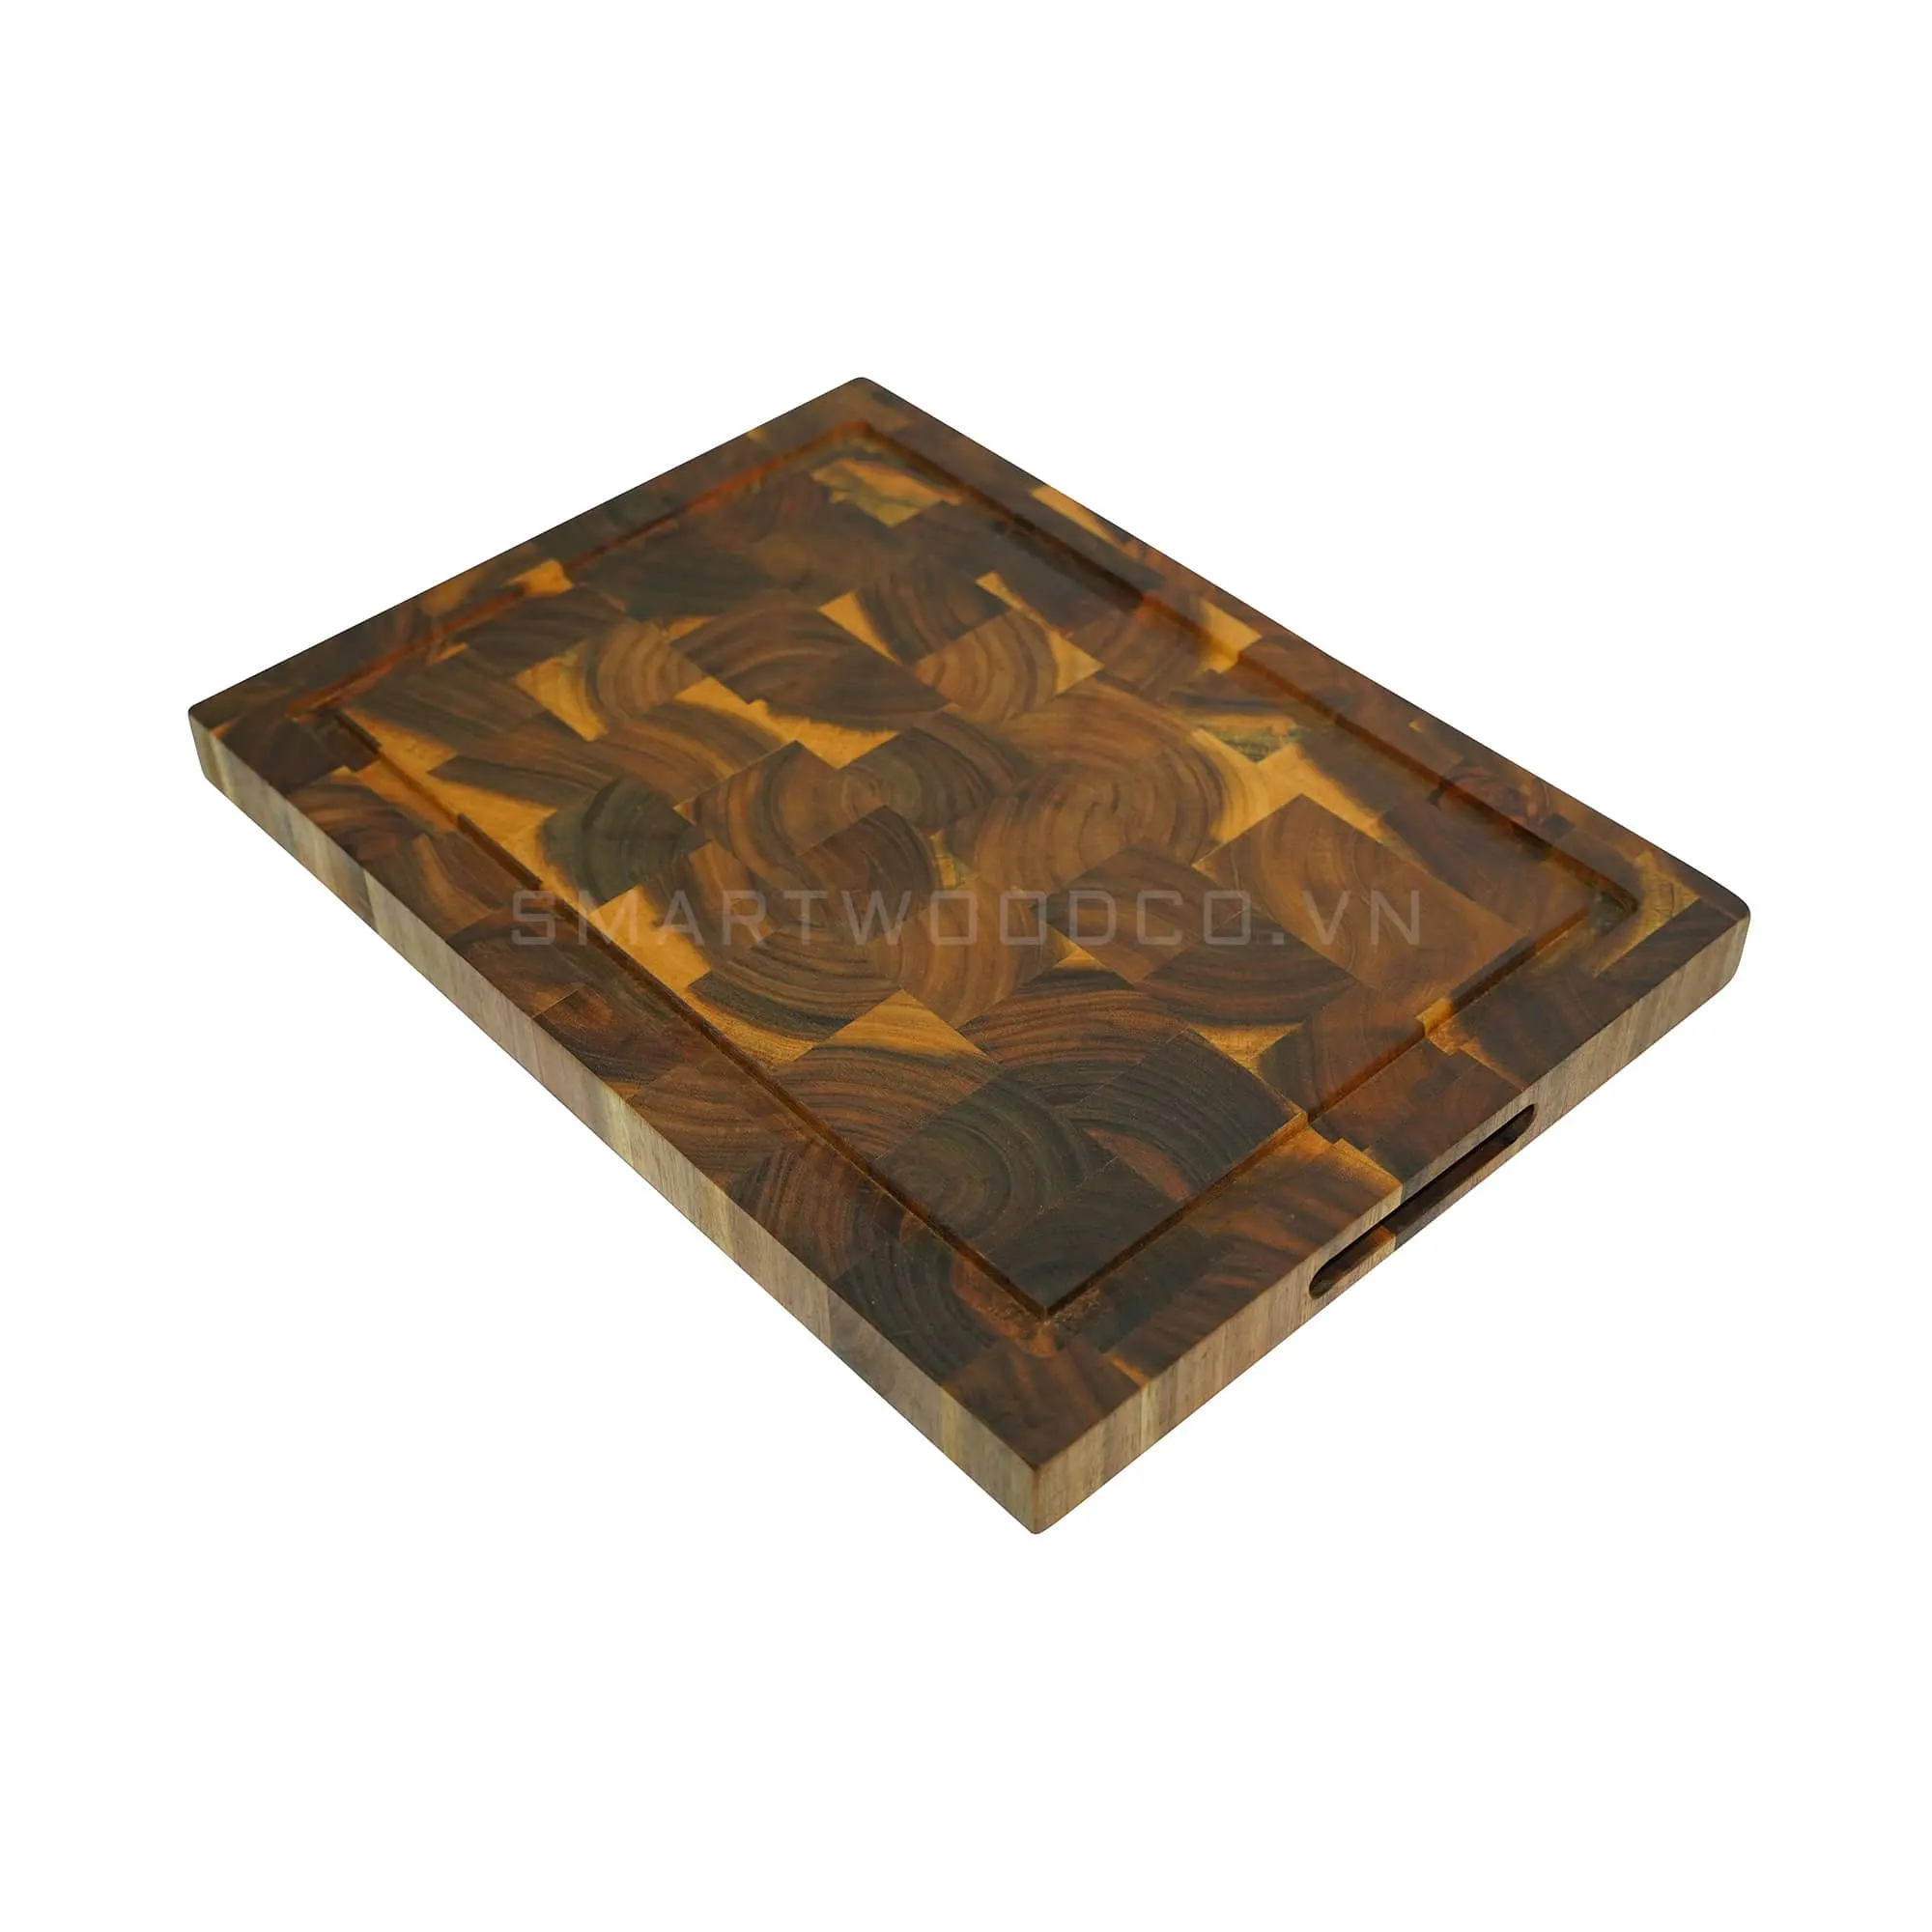 GOOD QUALITY DURABLE ACACIA WOOD FOR ACACIA CHOPPING BOARD FROM SMARTWOOD